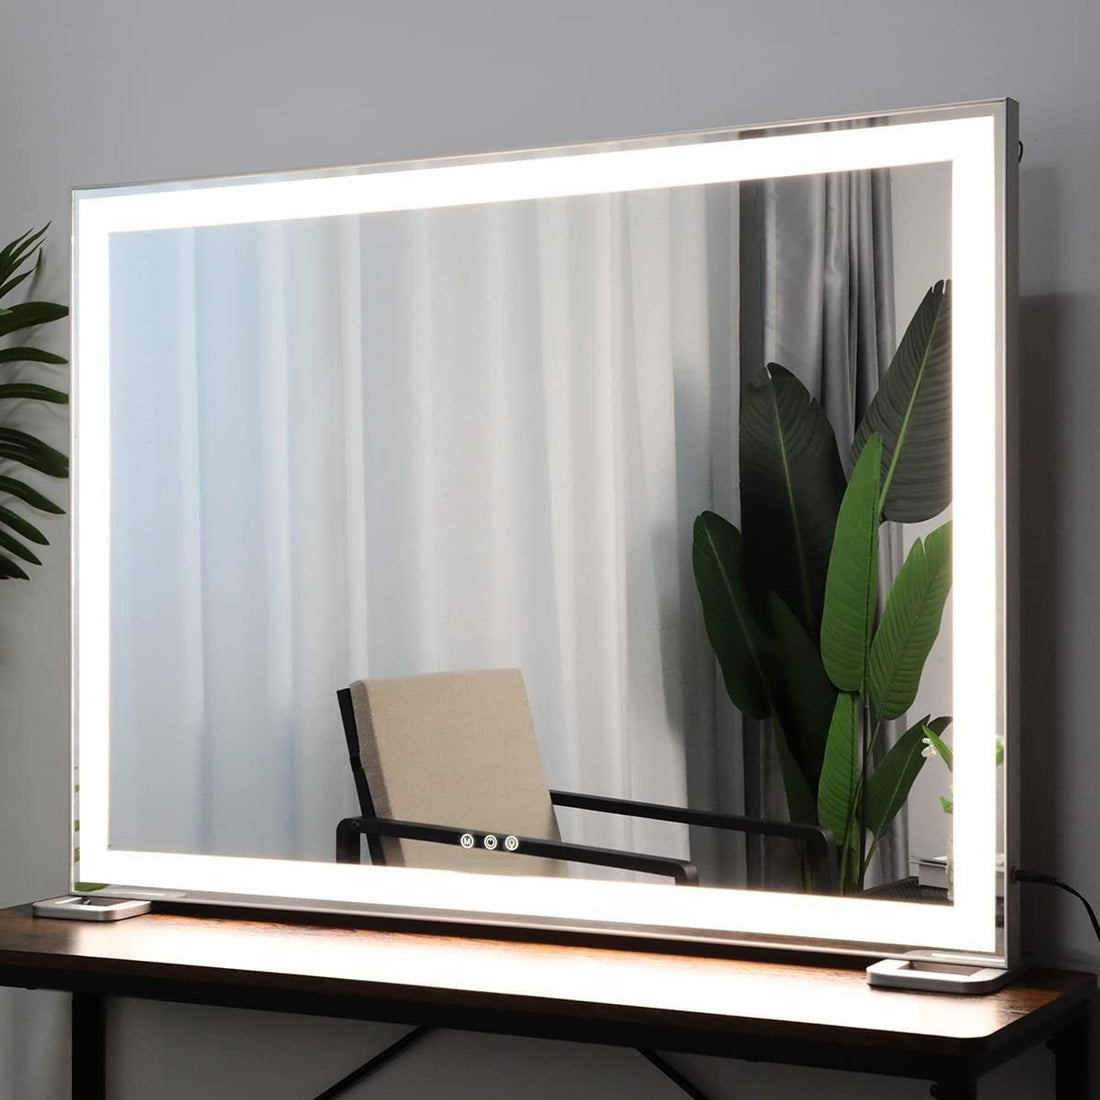 Large Hollywood Makeup Mirror 3 Modes Lighted and Smart Touch Control (92 x 68 cm)-Makeup Mirrors-PEROZ Accessories